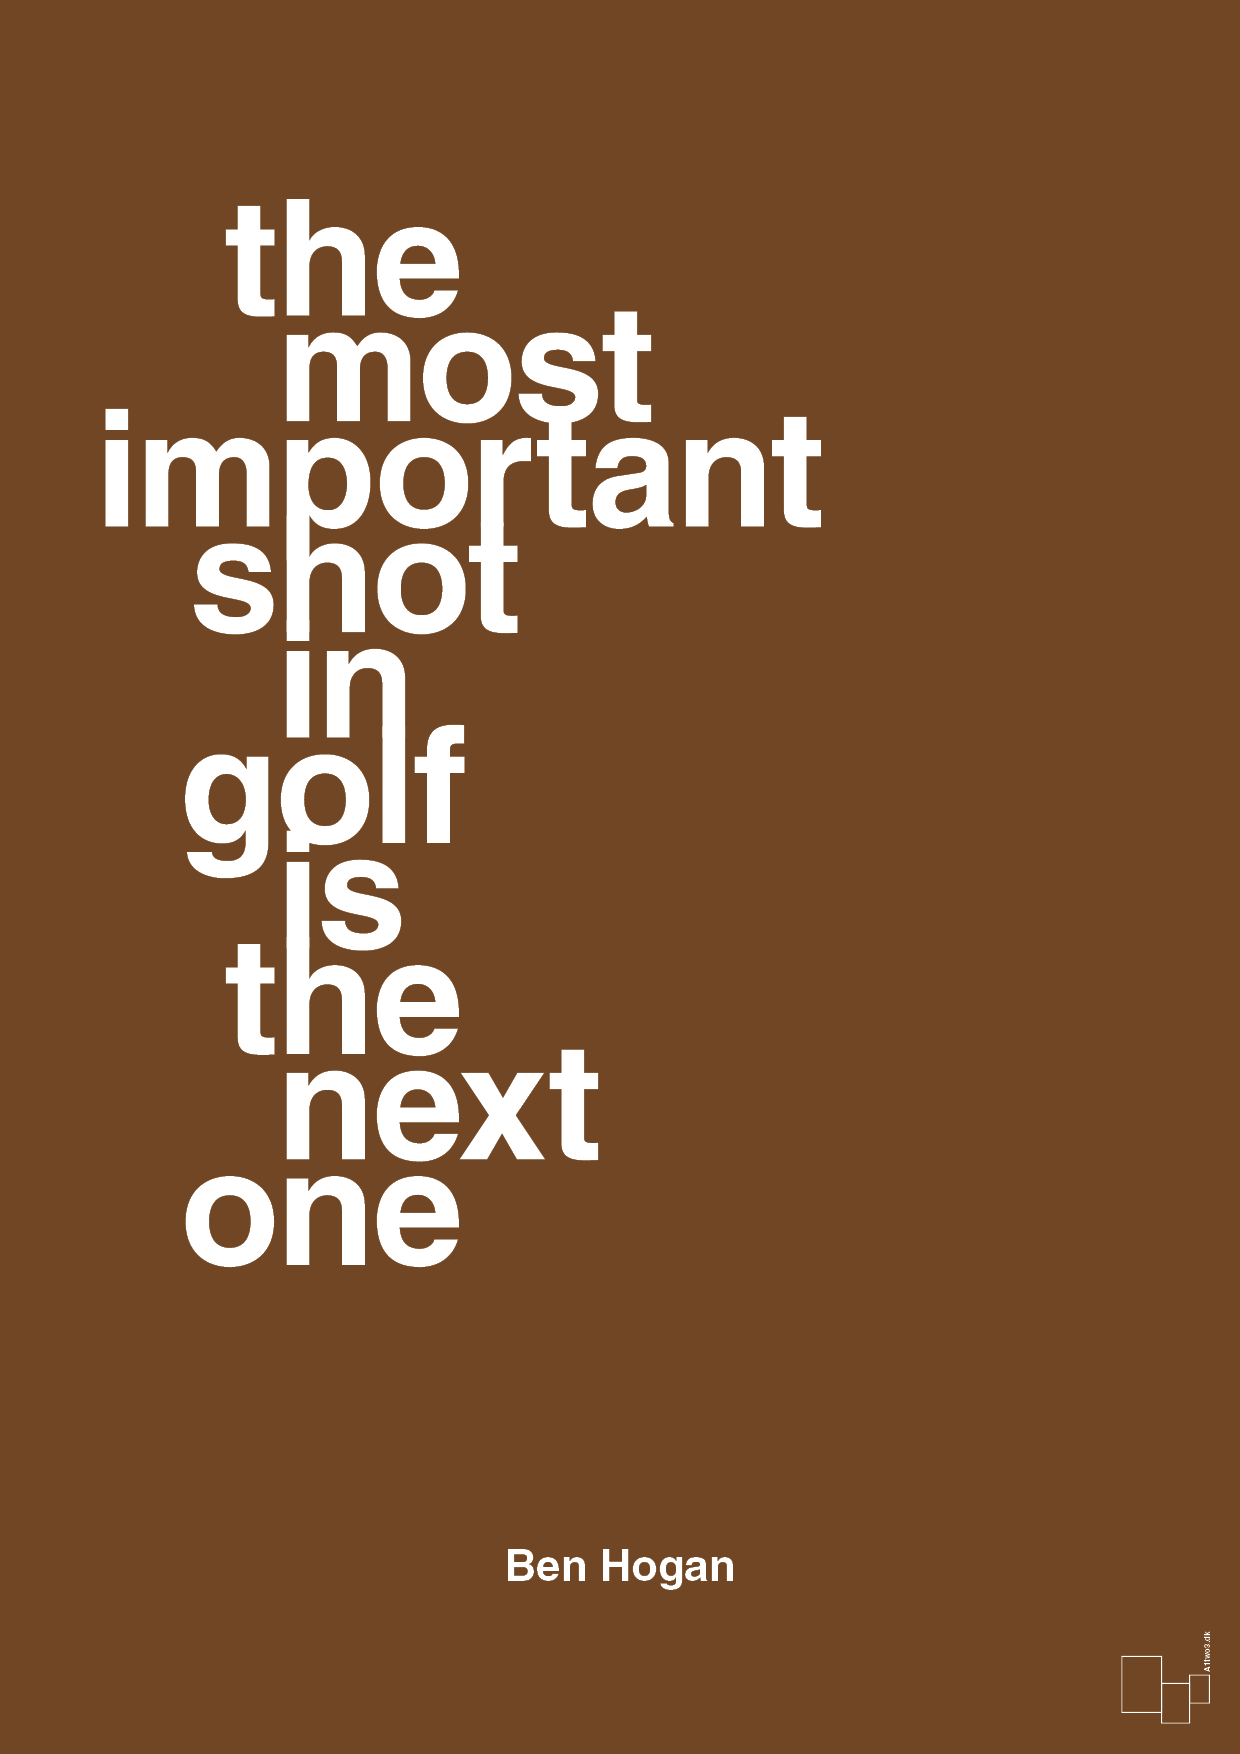 the most important shot in golf is the next one - Plakat med Citater i Dark Brown